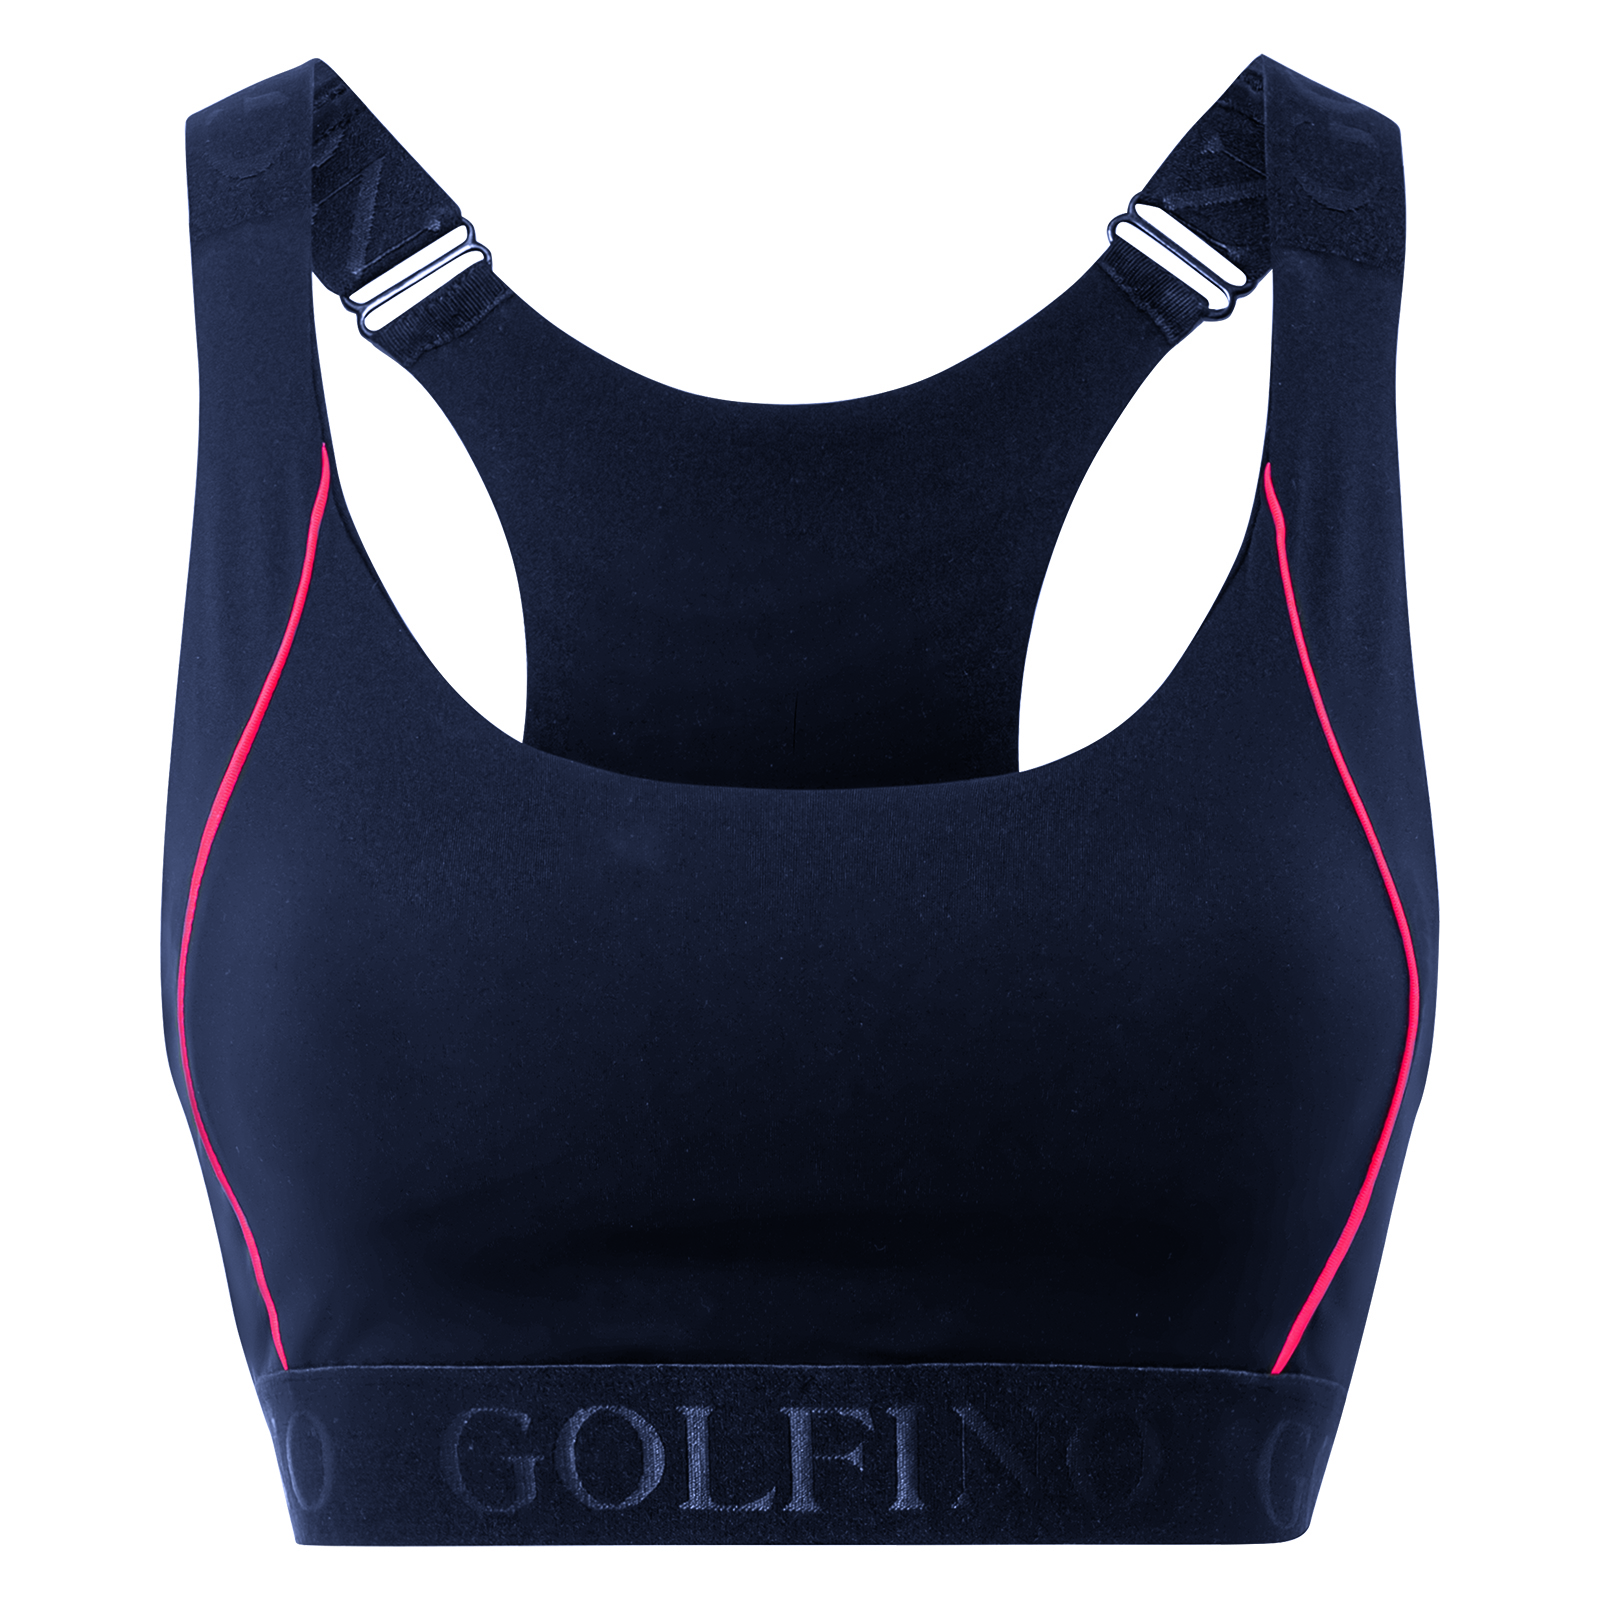 High performance Ladies sports bustier with contrast stitching